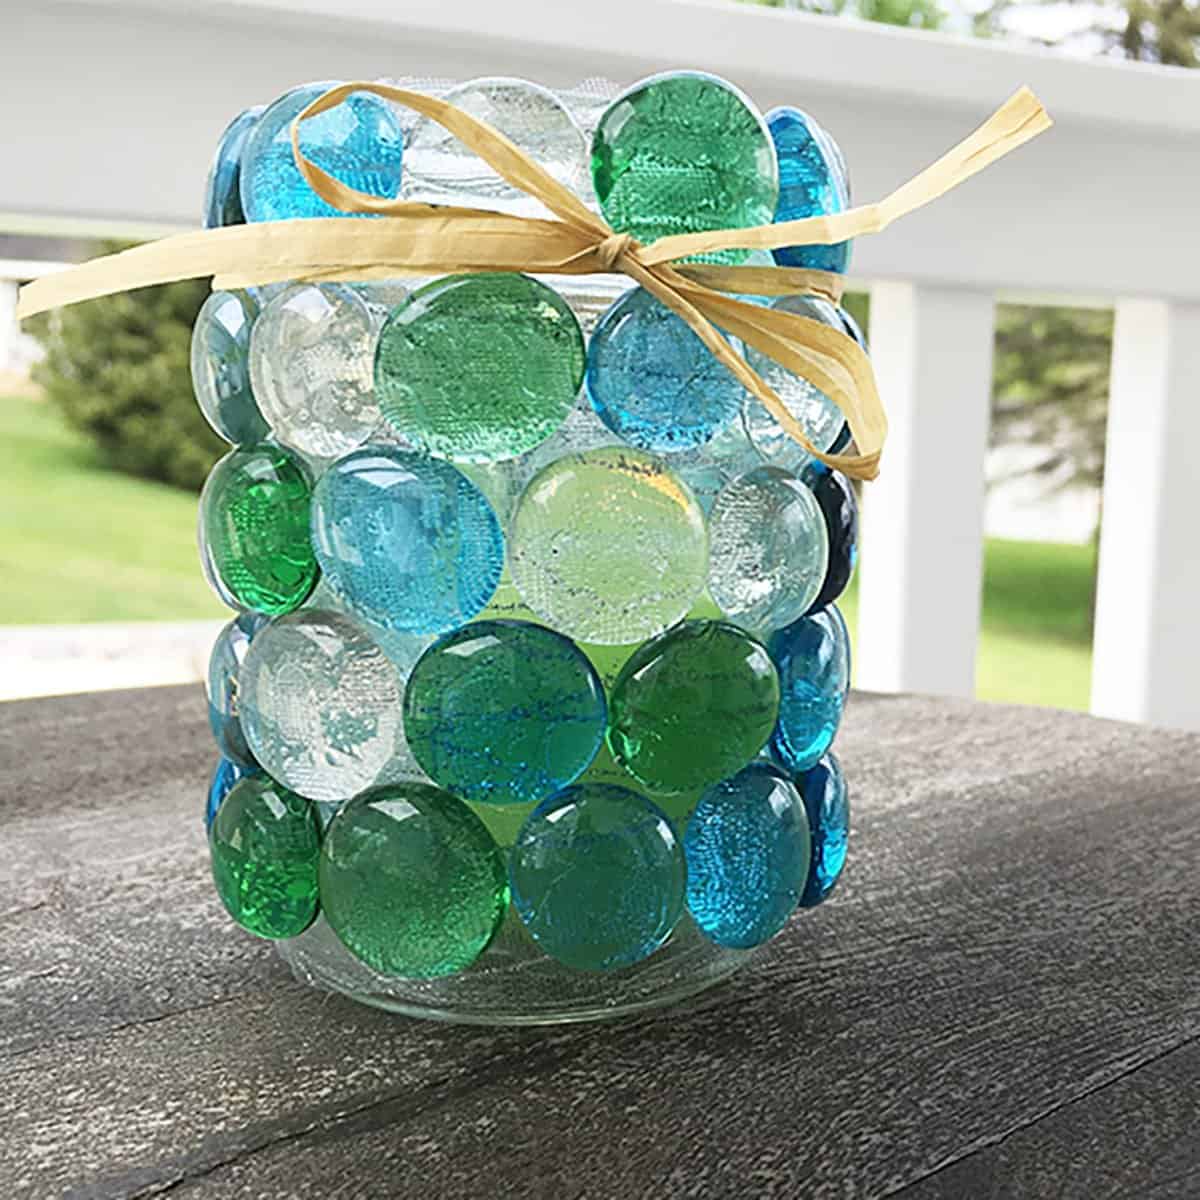 Candle Gems in glass container